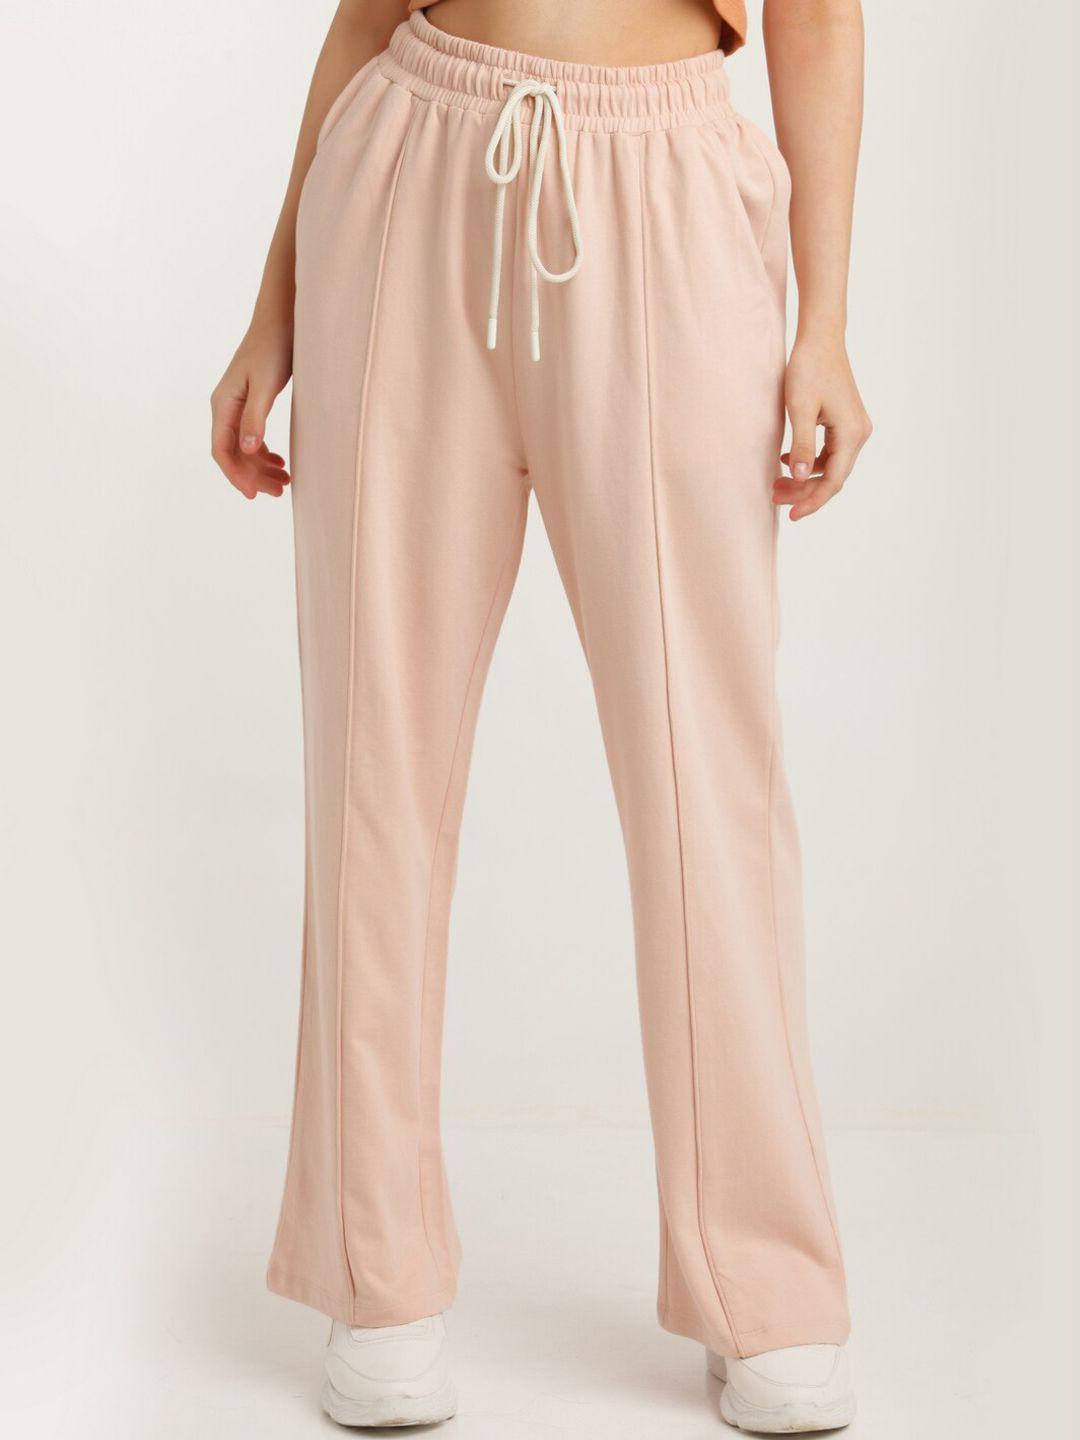 zink-z-women-peach-coloured-flared-high-rise-cotton-trousers